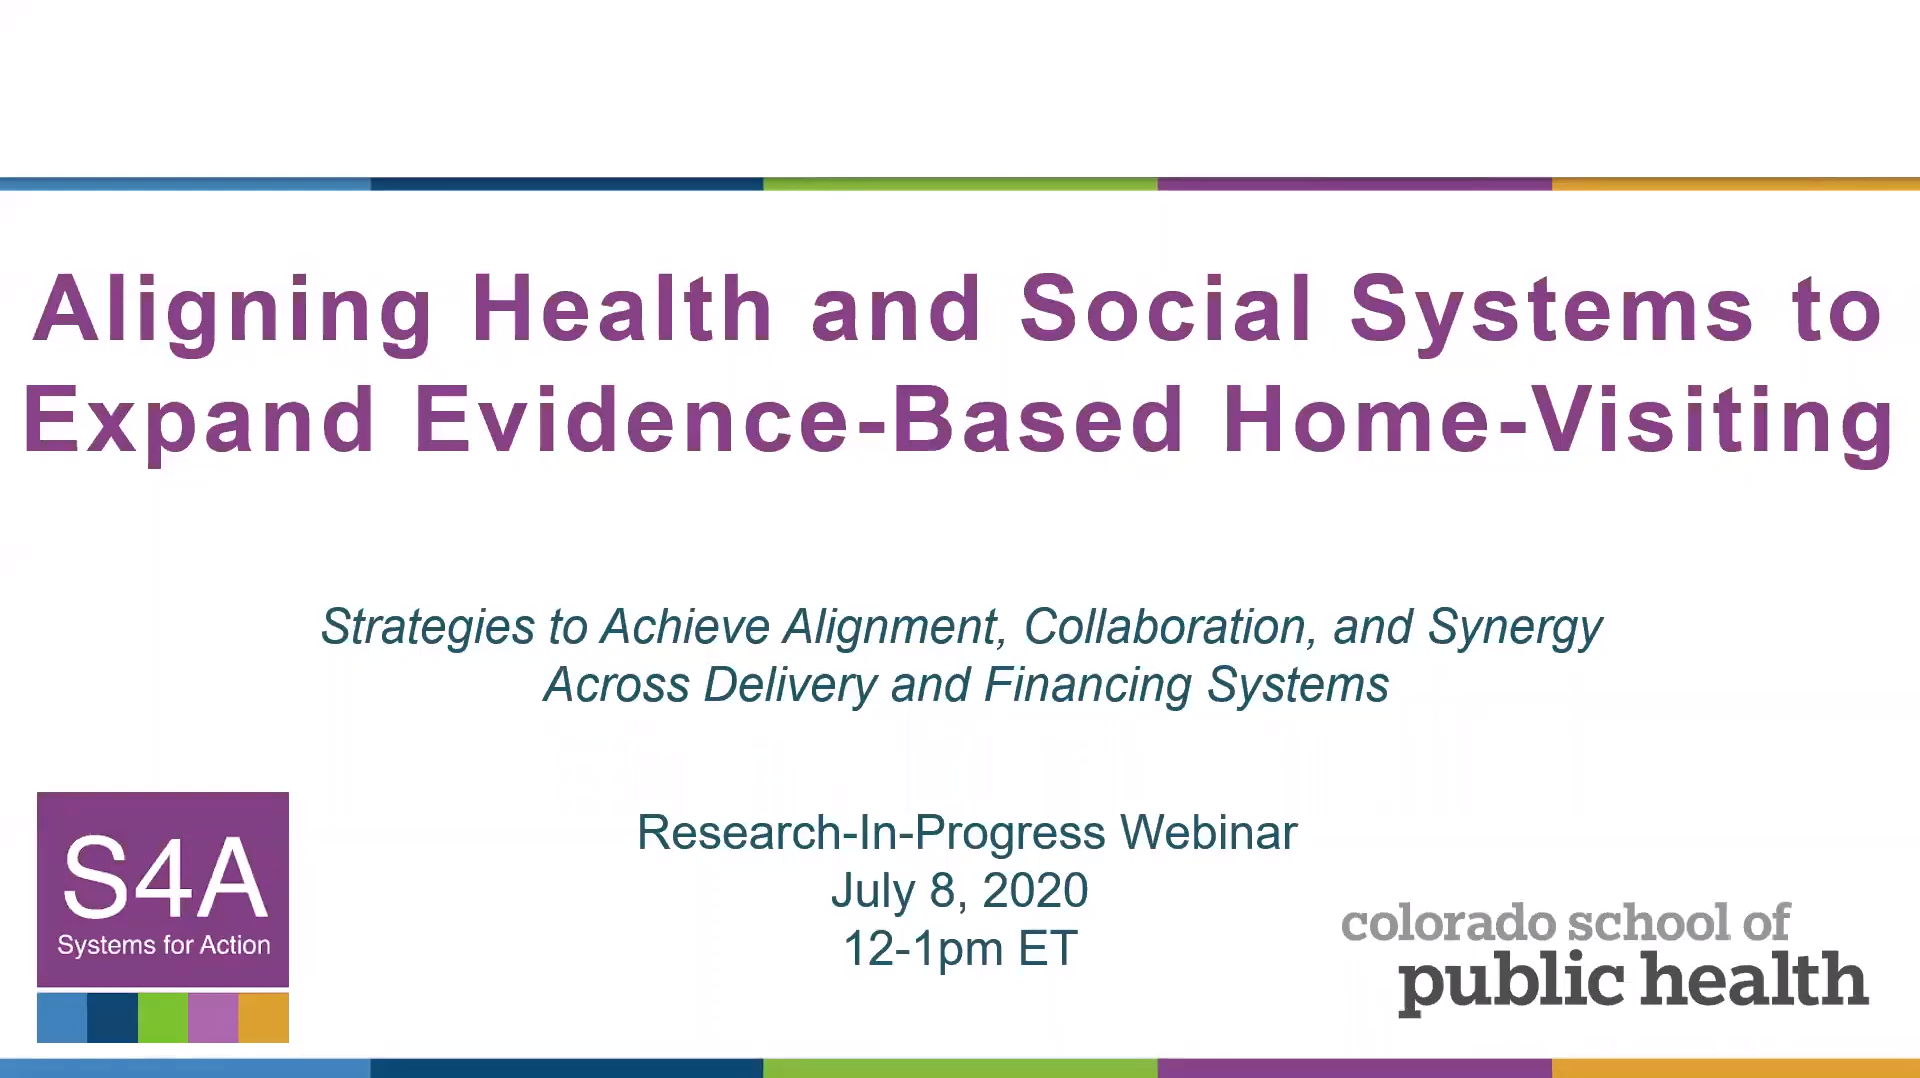 Aligning Health and Social Systems to Expand Evidence-Based Home-Visiting